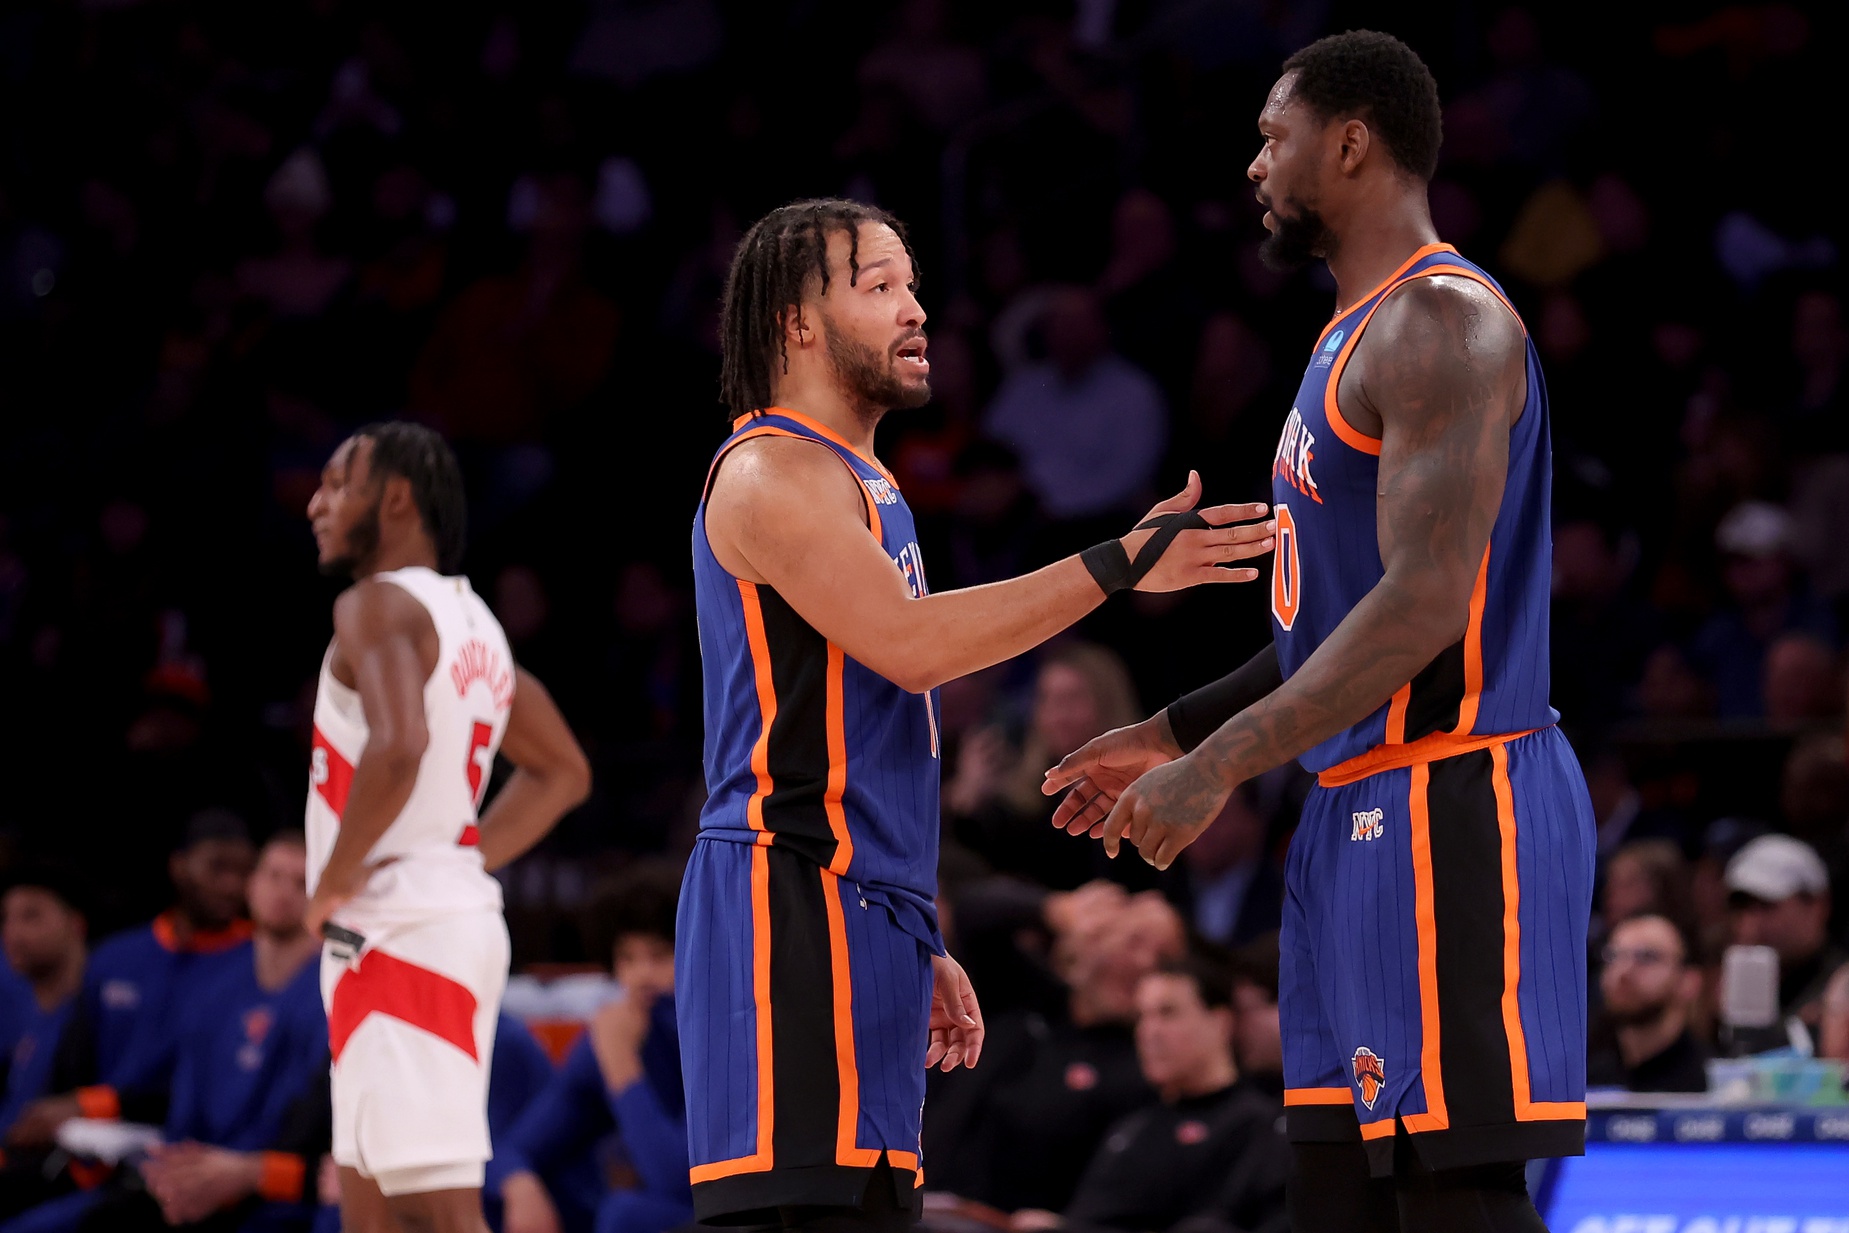 The Knicks are looking to be title contenders this upcoming season.